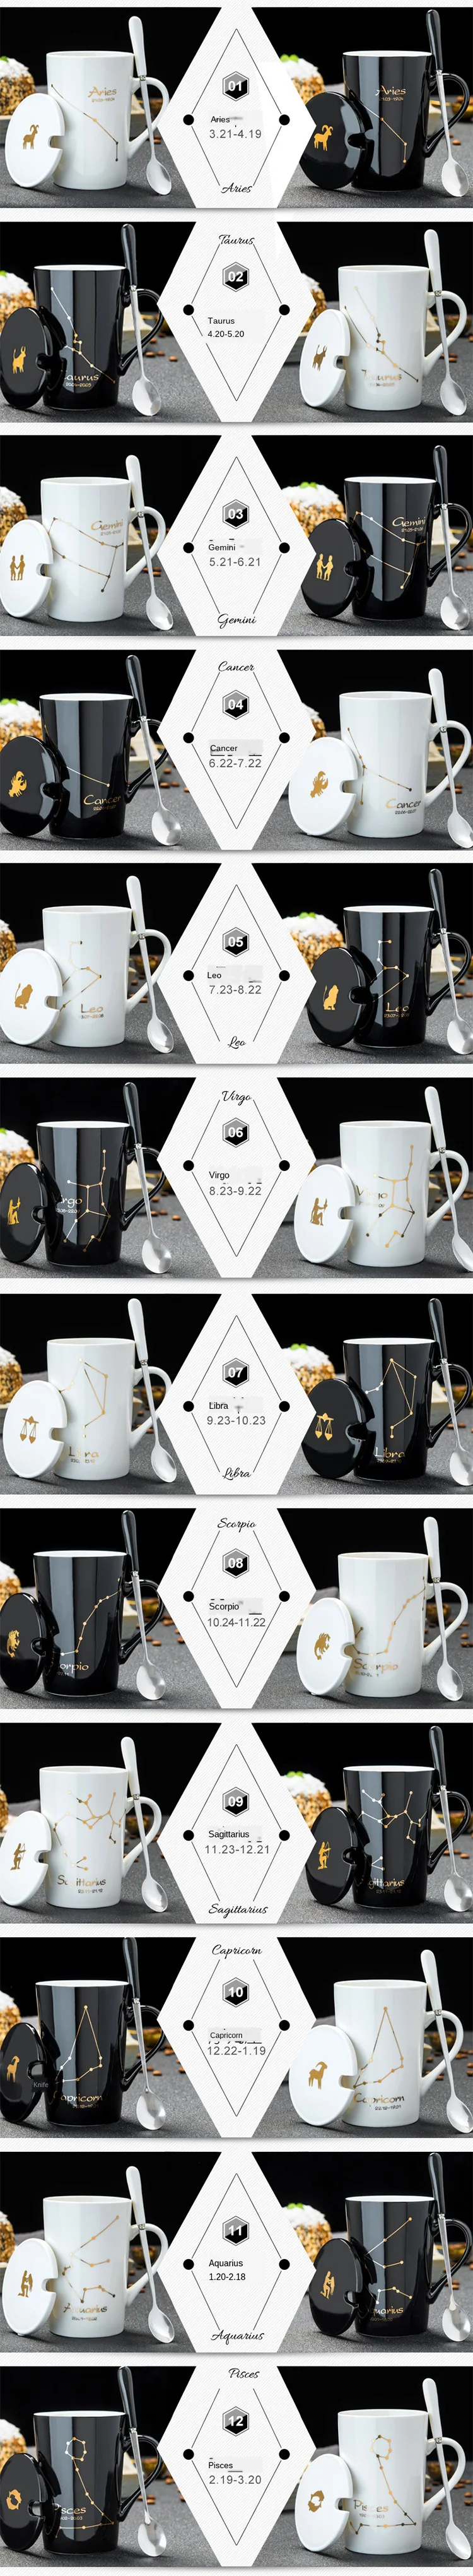 Luxury White Black 12 Constellations Gold Pattern Ceramic Coffee Mug With Lid Spoon And Gold Handle For Souvenir.jpg